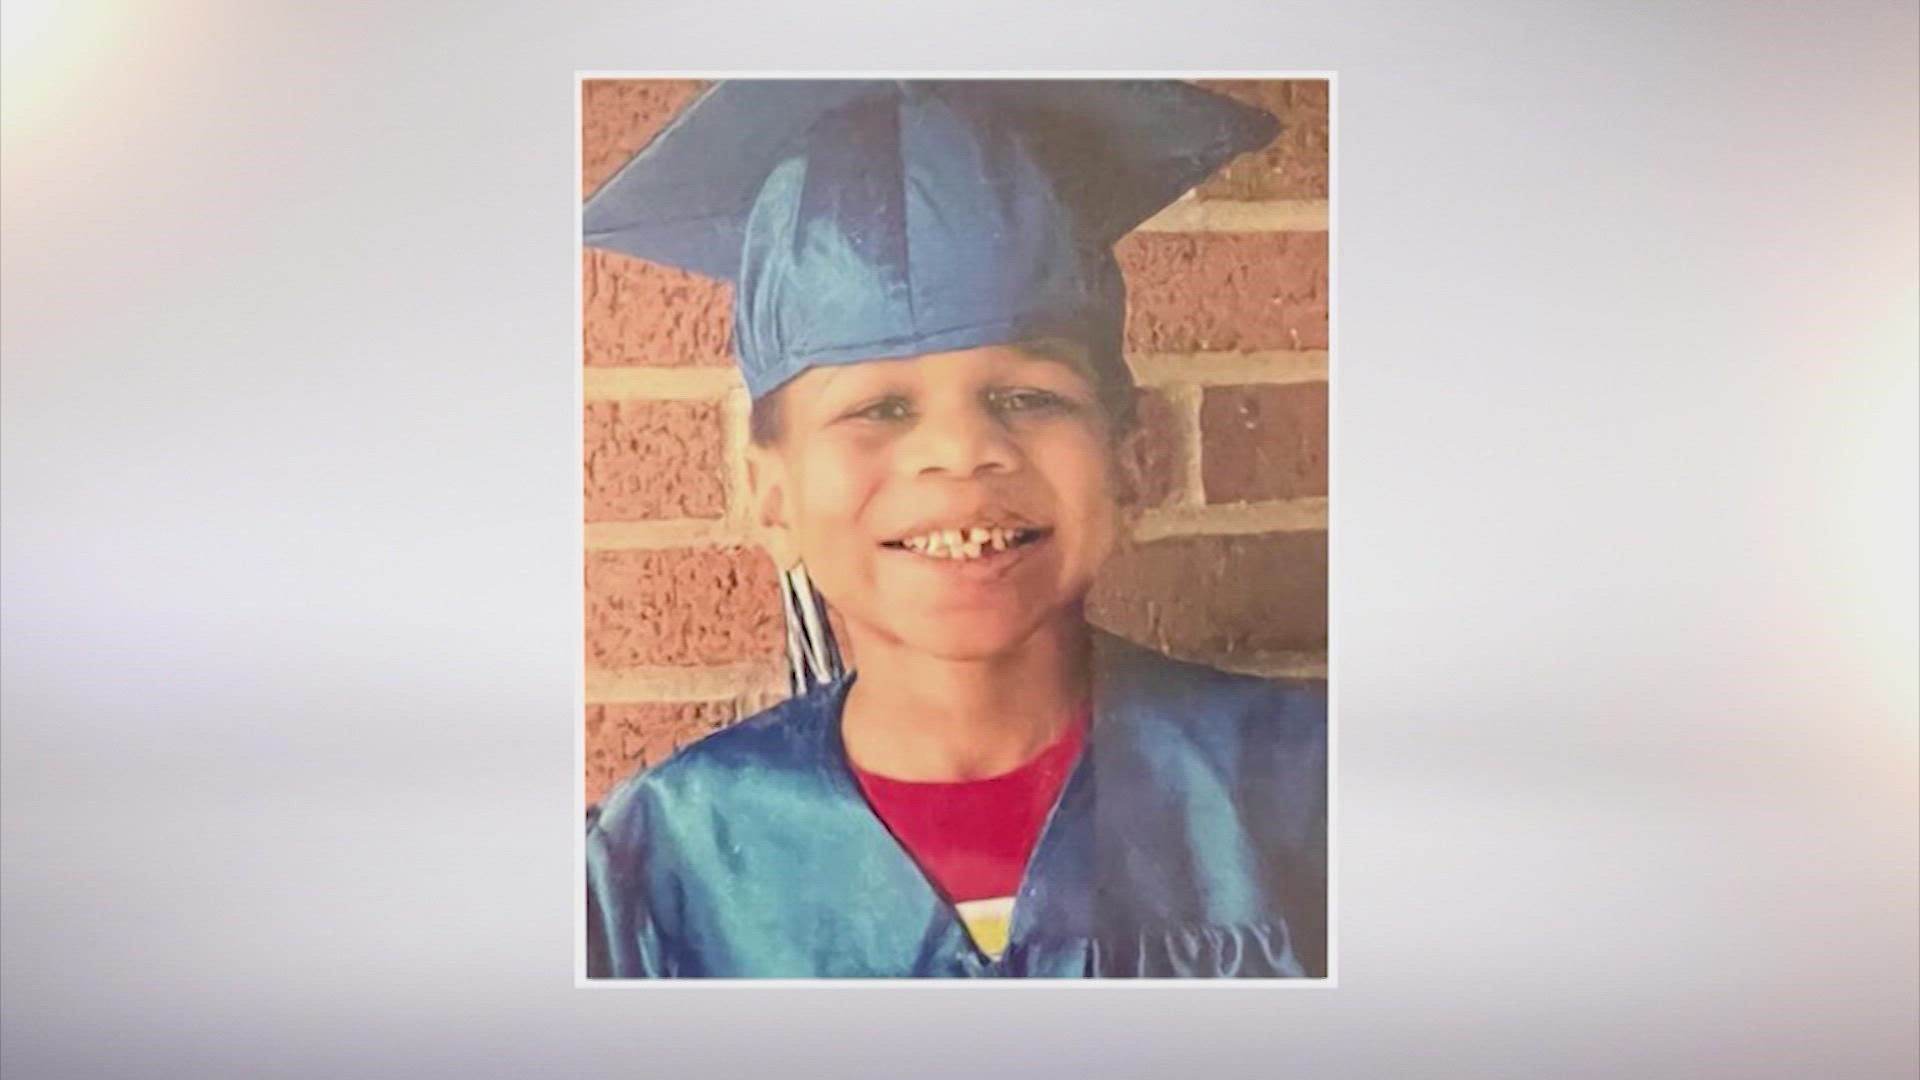 After being questioned by detectives all day Thursday, the adoptive father of a Spring boy found dead in a washing machine was dropped off at his home.